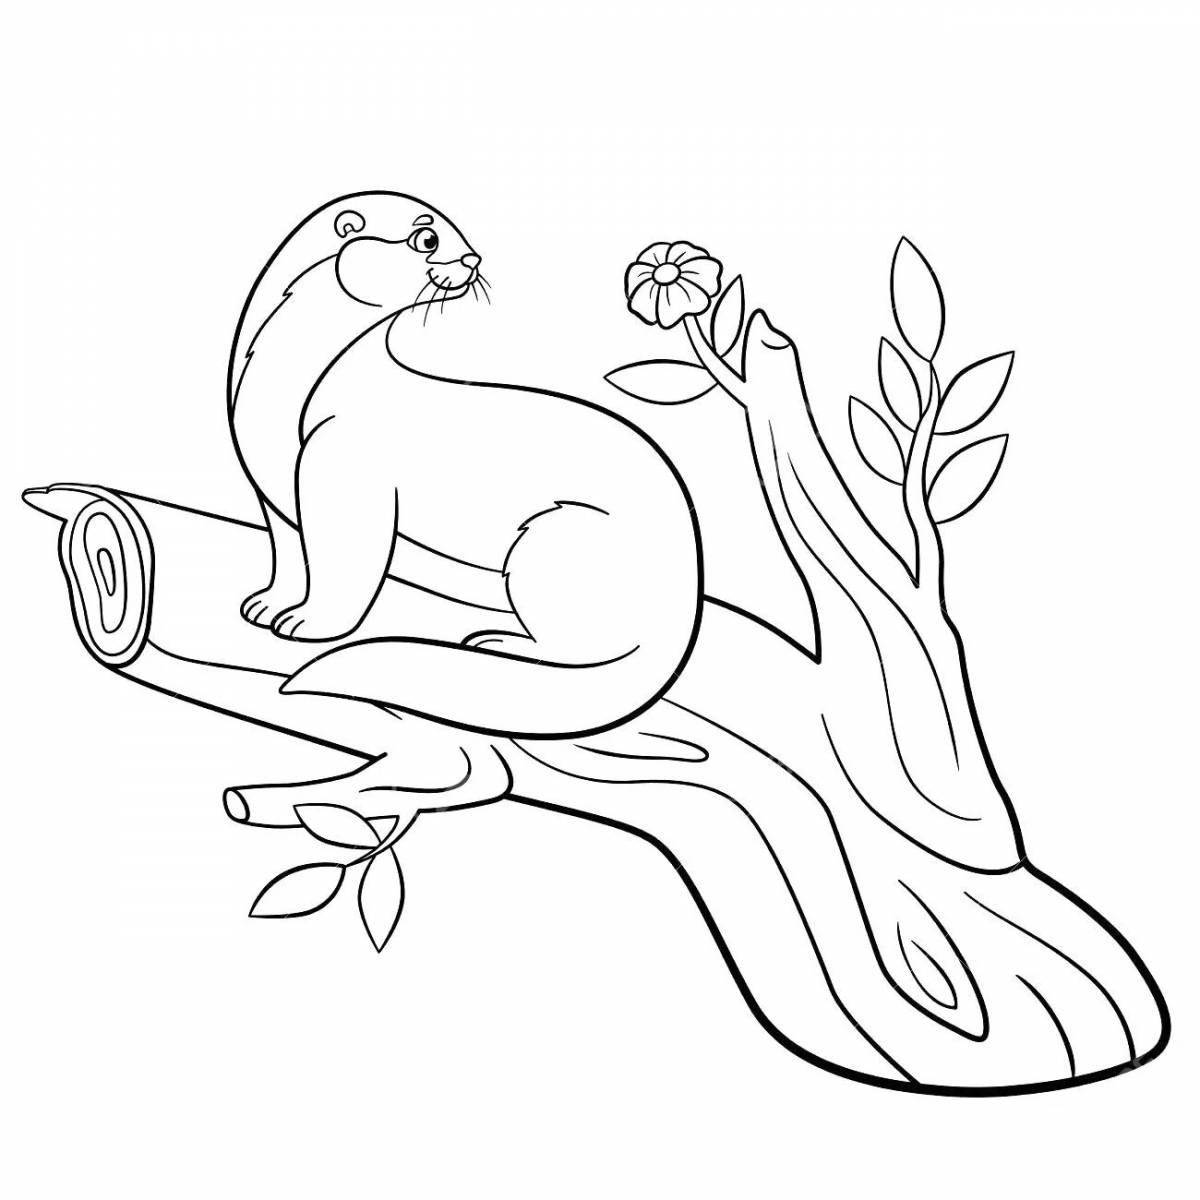 Fun otter coloring for kids